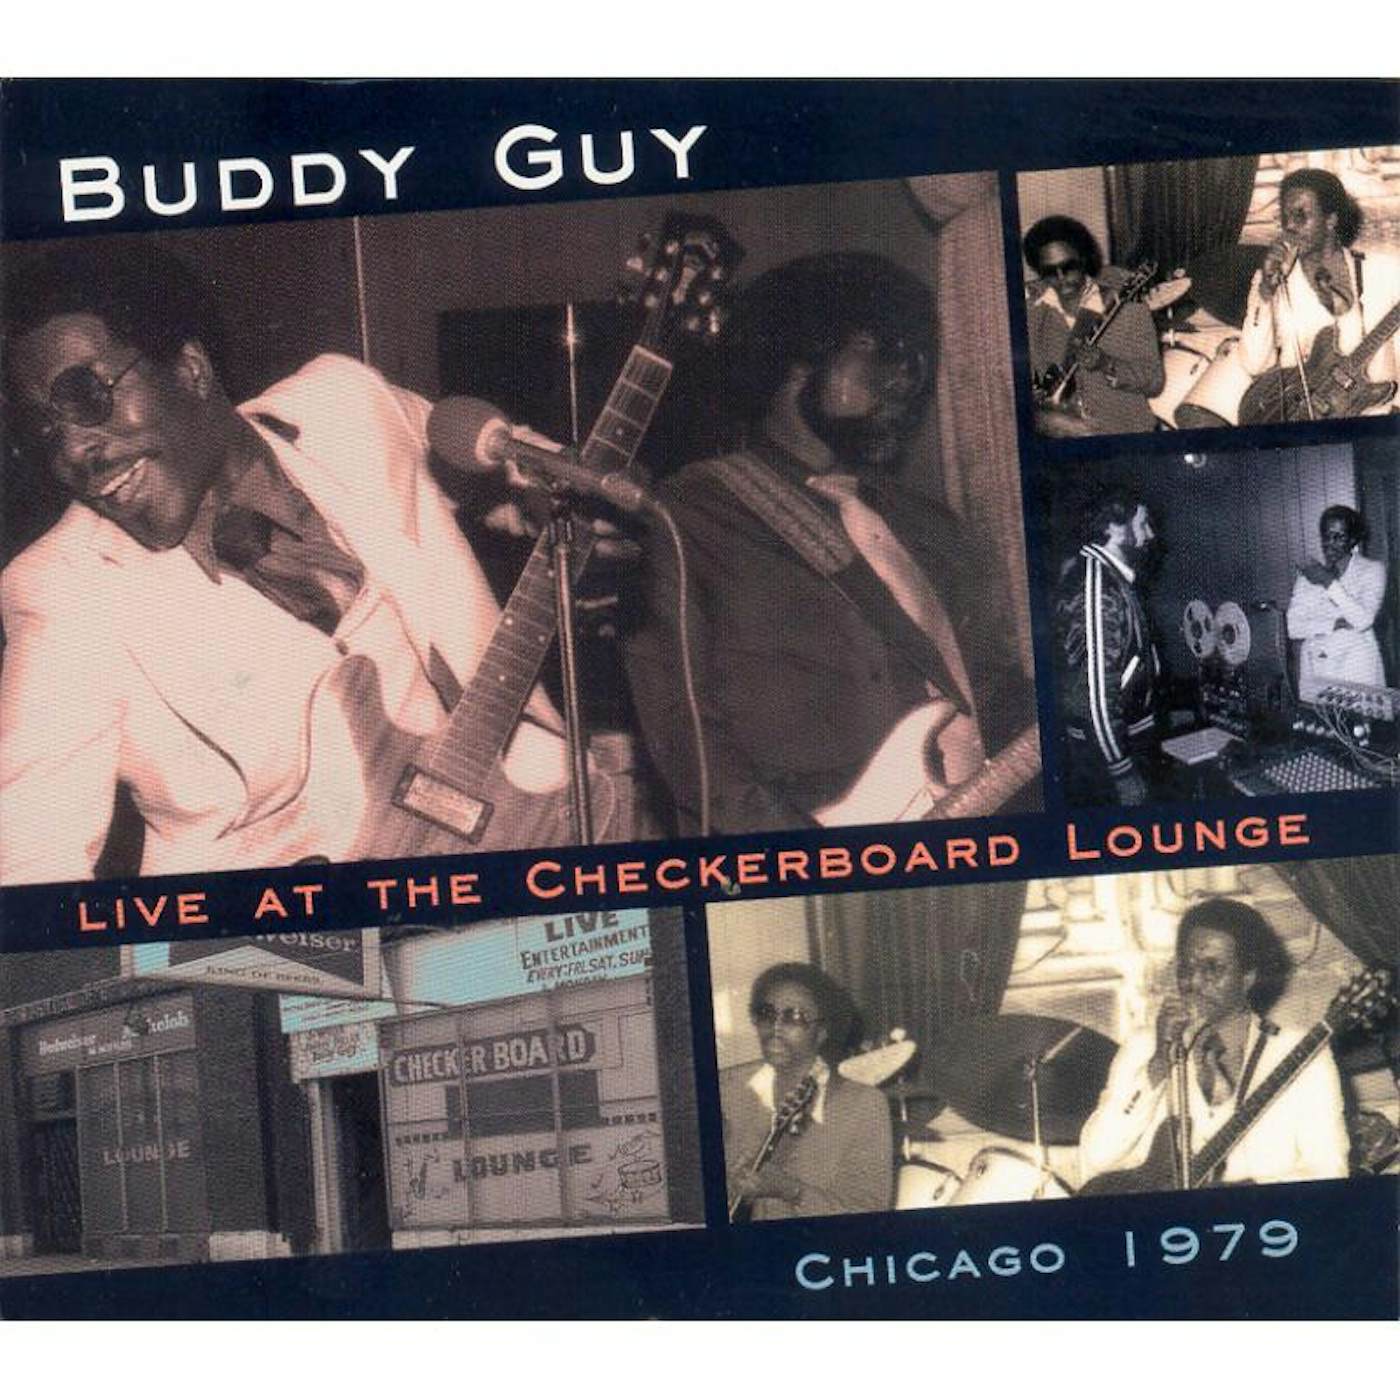 Buddy Guy CD - Live @ The Checkerboard Lounge